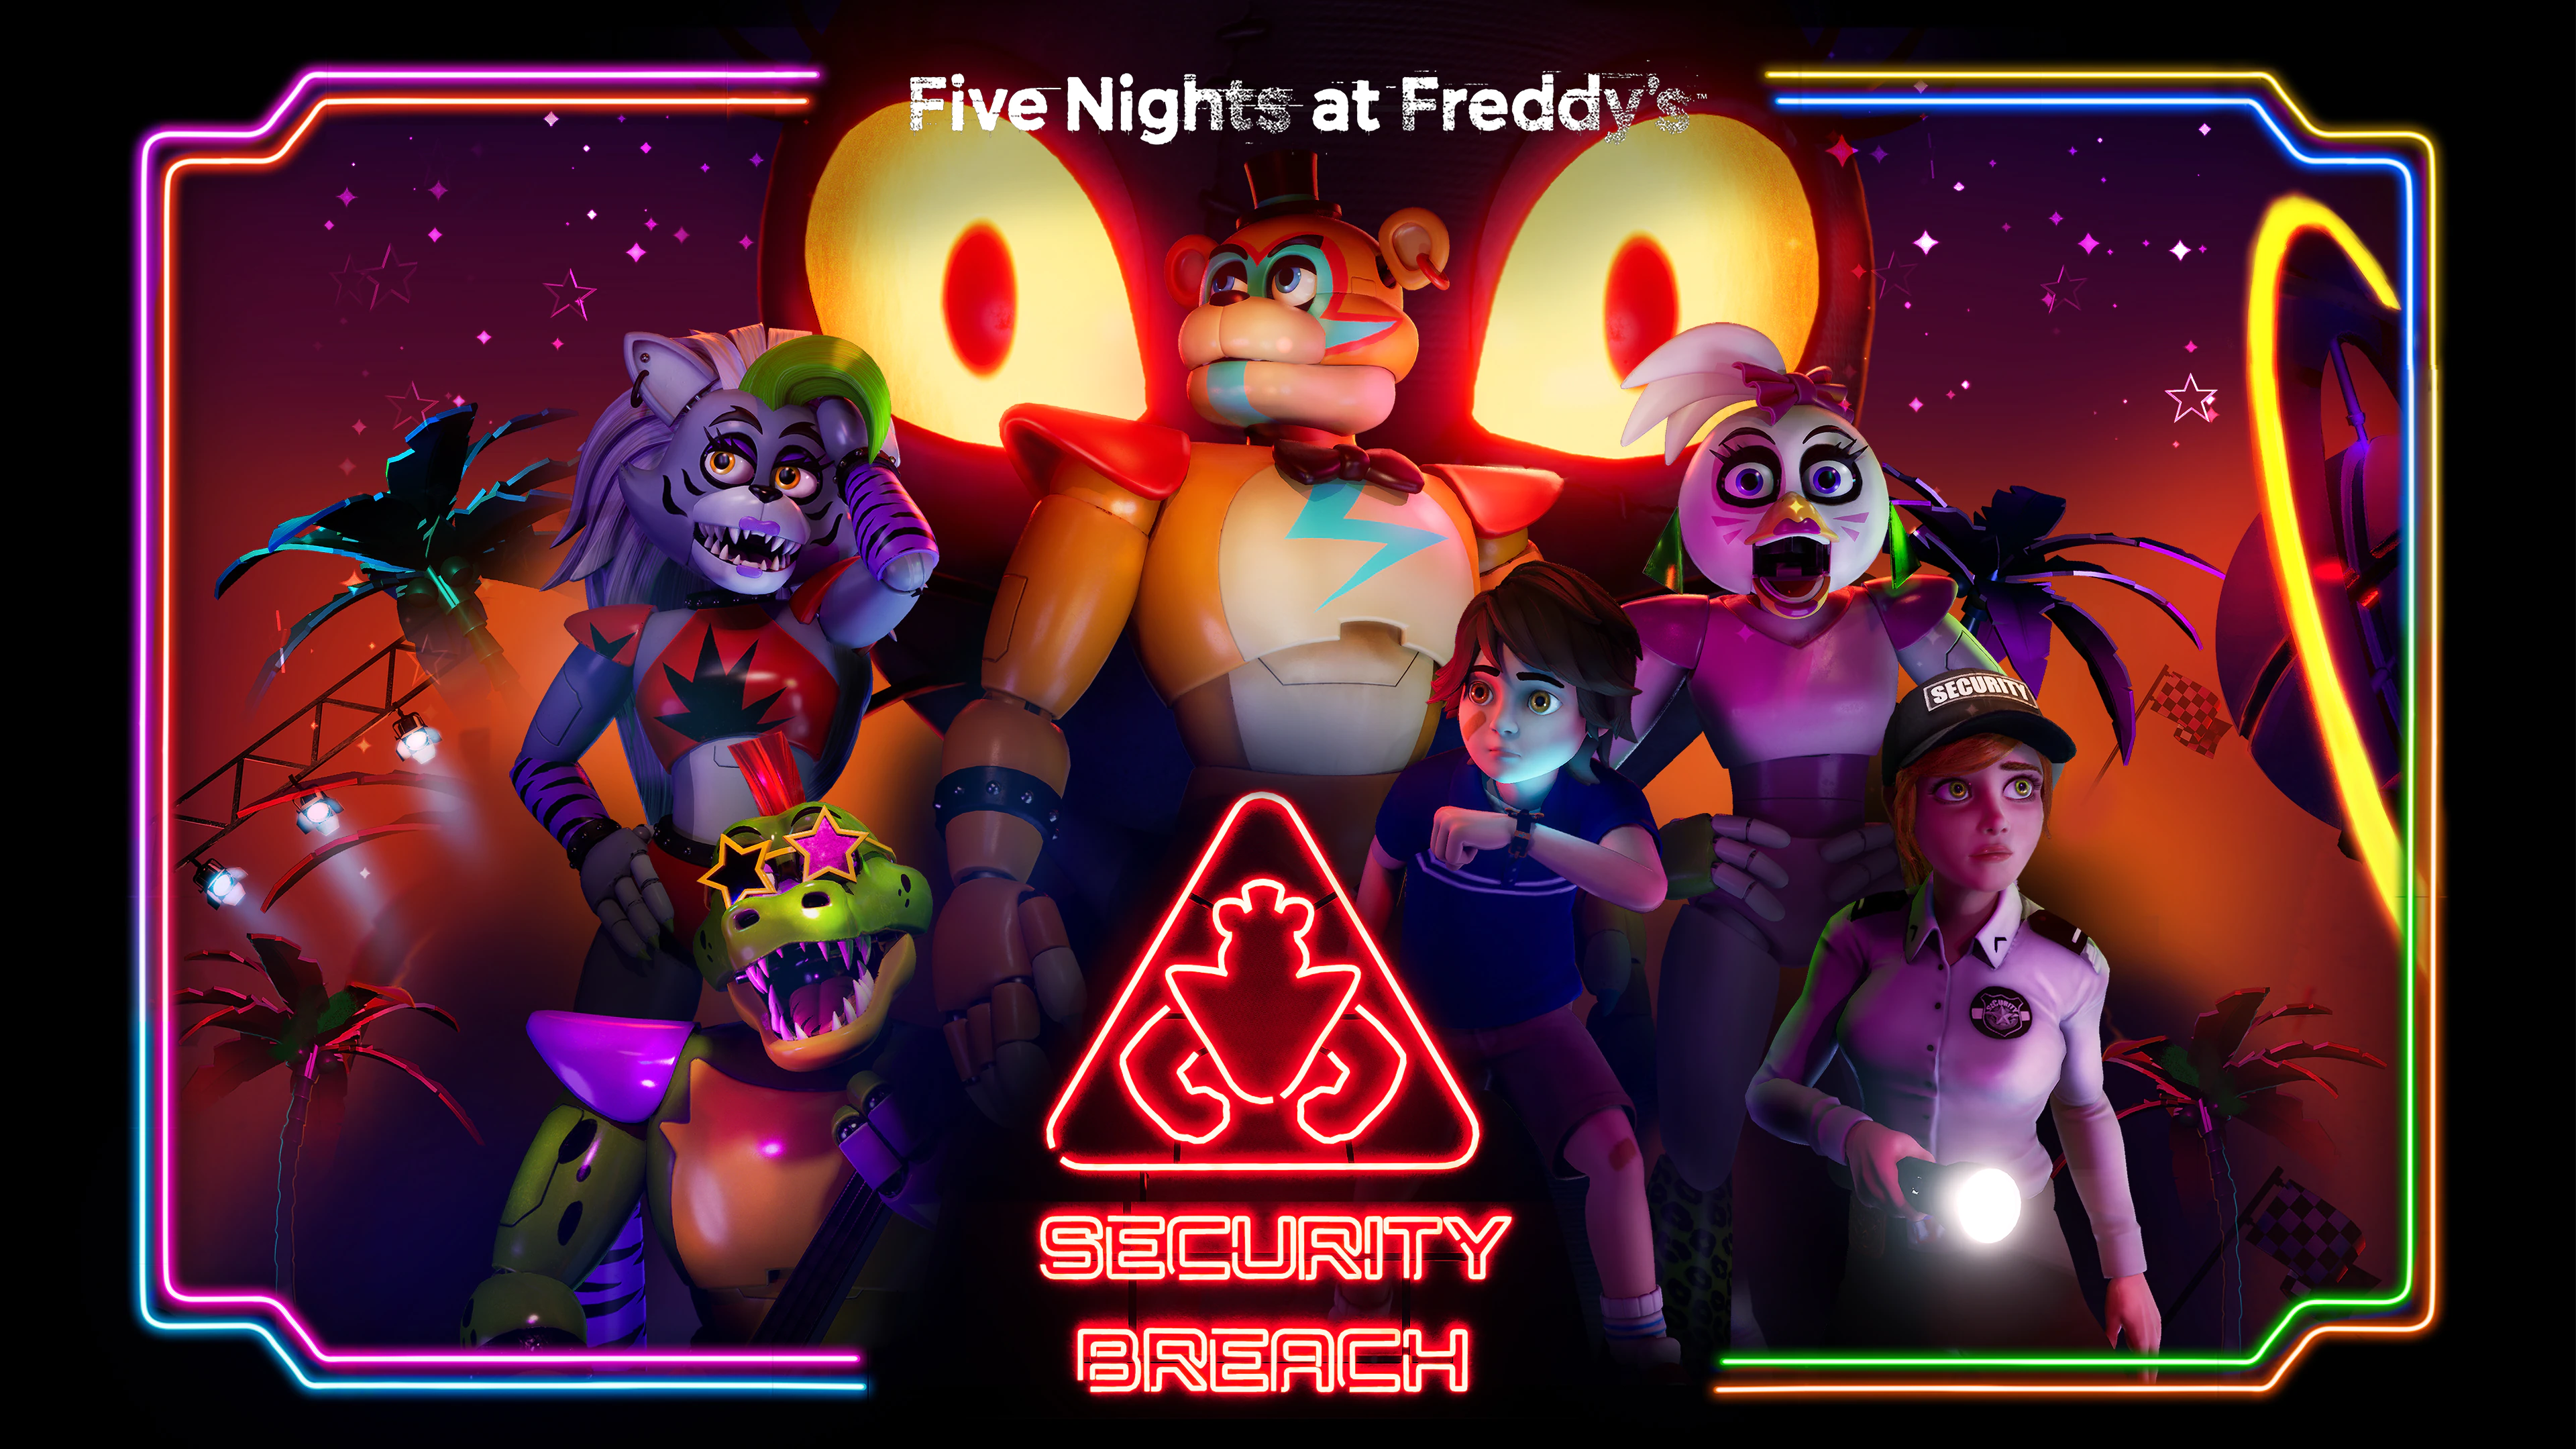 Five Nights at Freddy's: Security Breach Wallpaper (4K) Nights at Freddy's Wallpaper